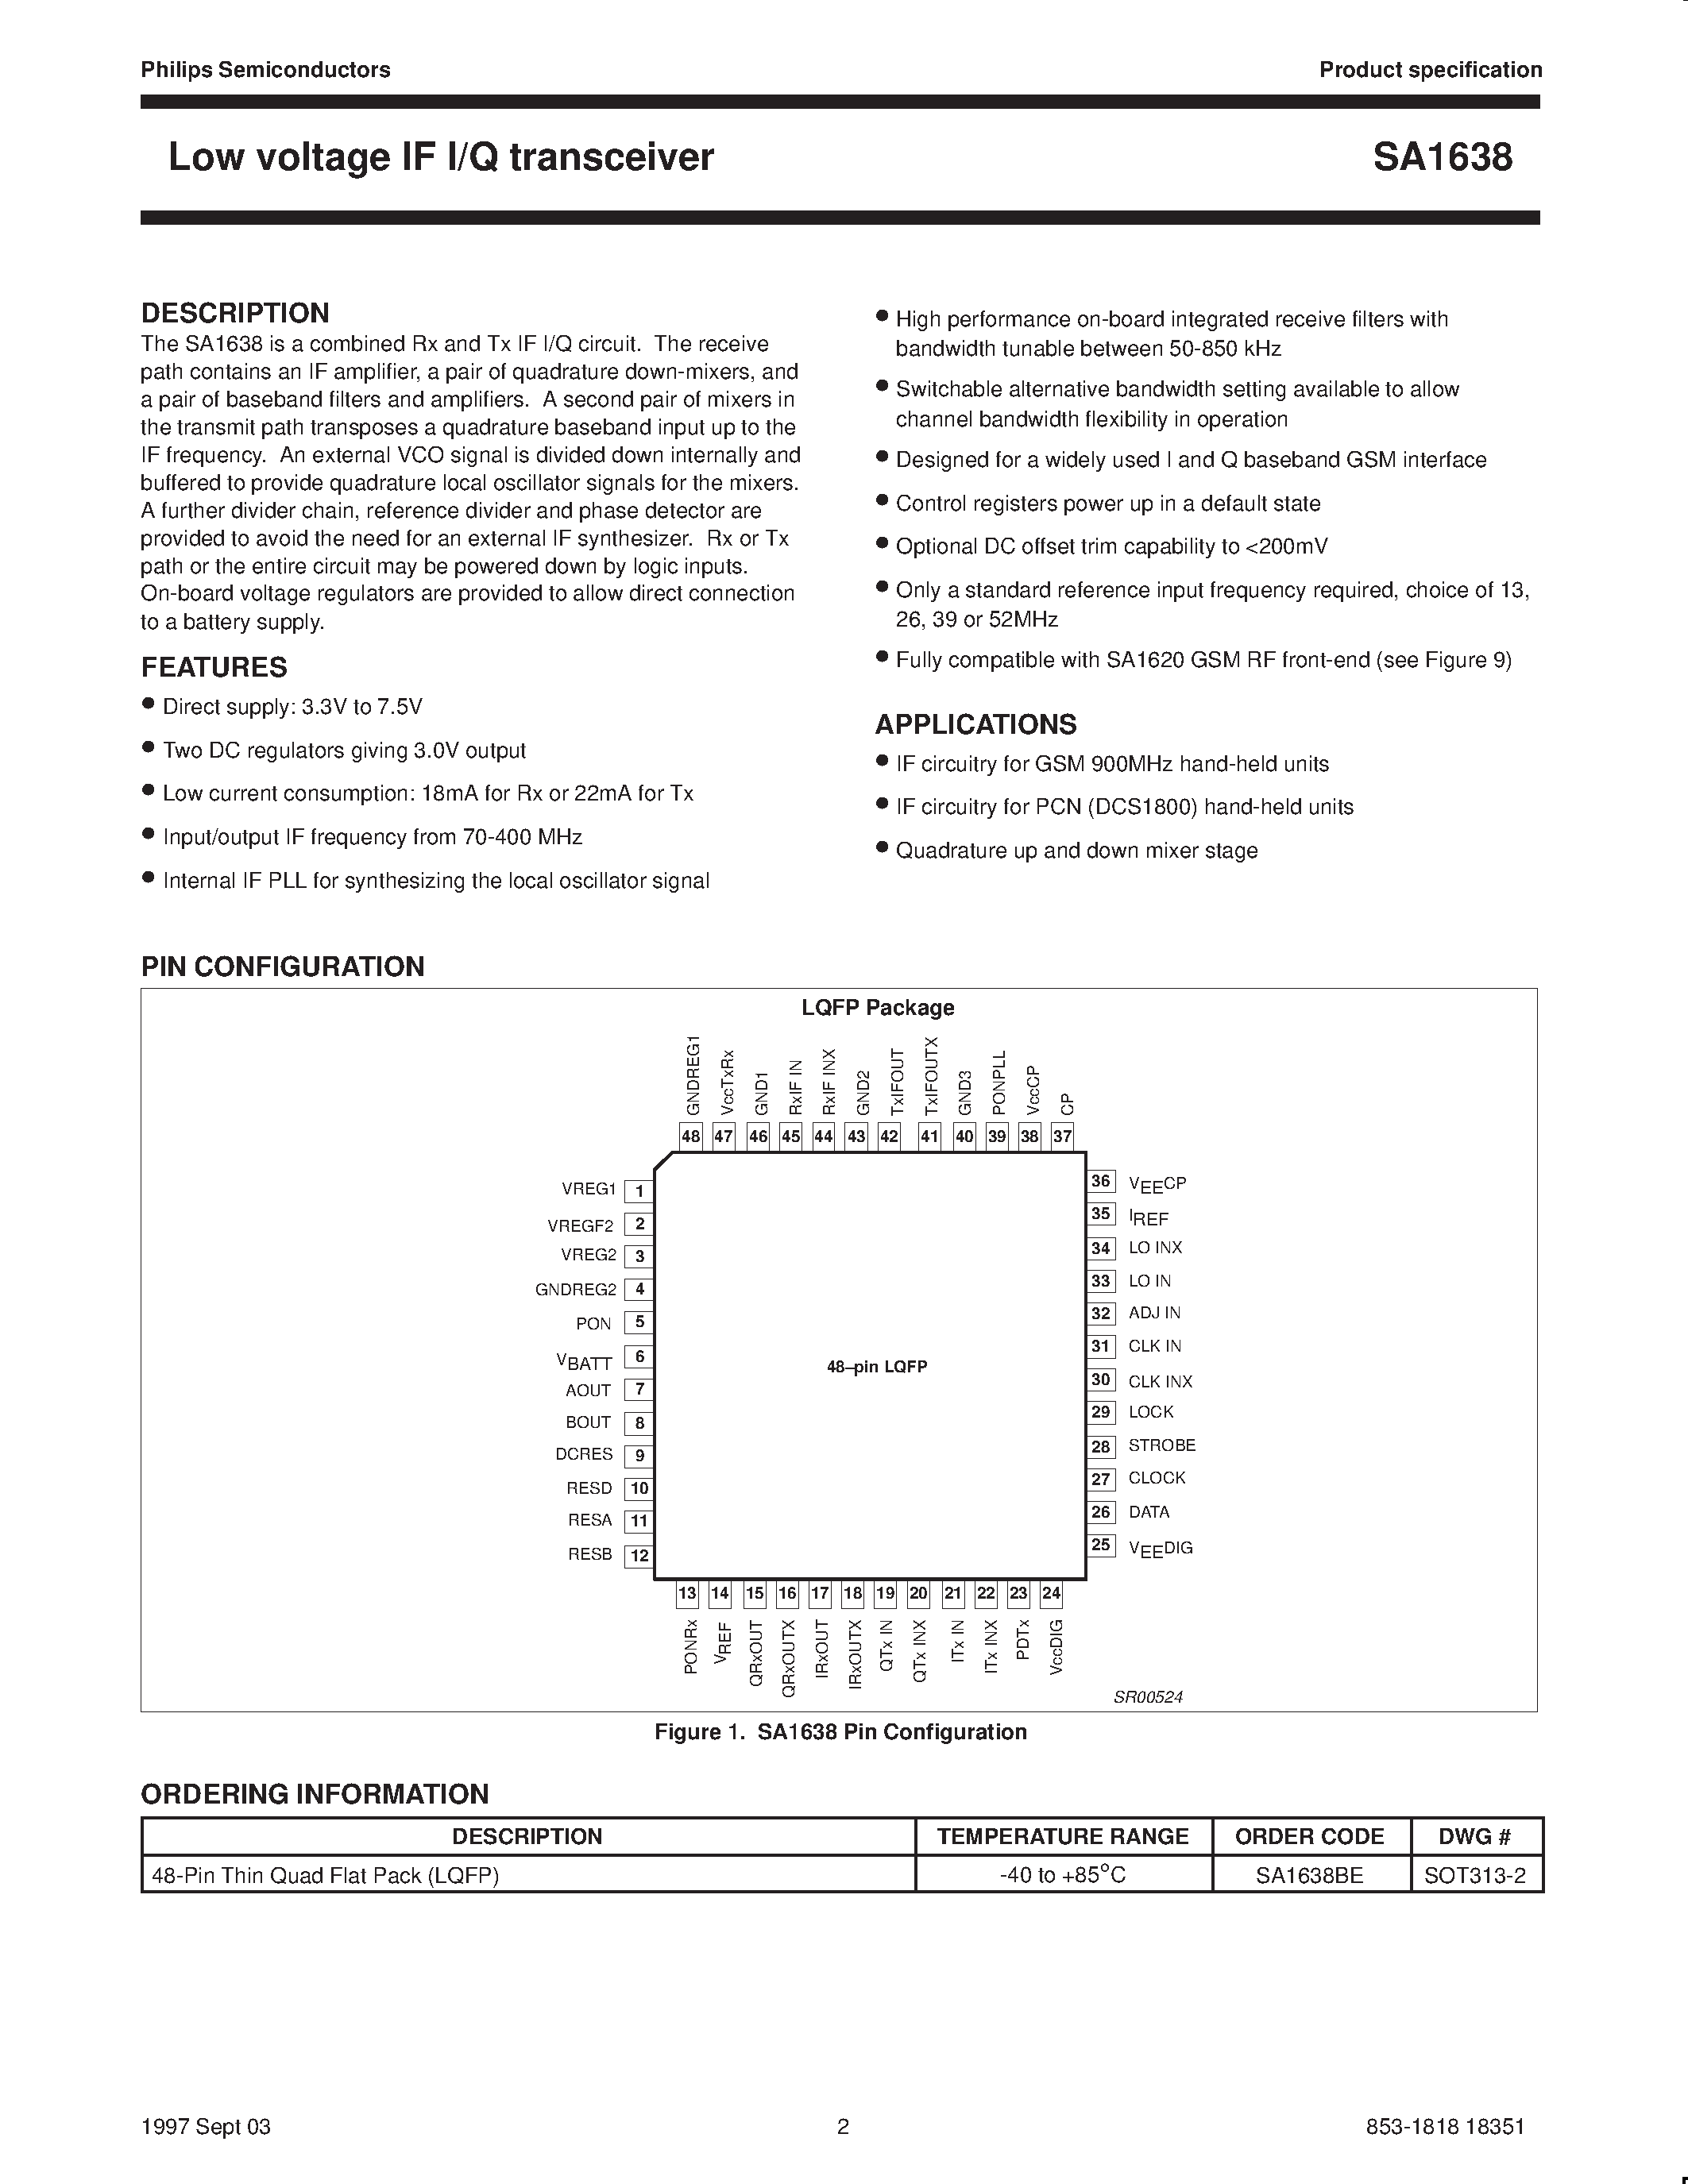 Datasheet SA1638 - Low voltage IF I/Q transceiver page 2